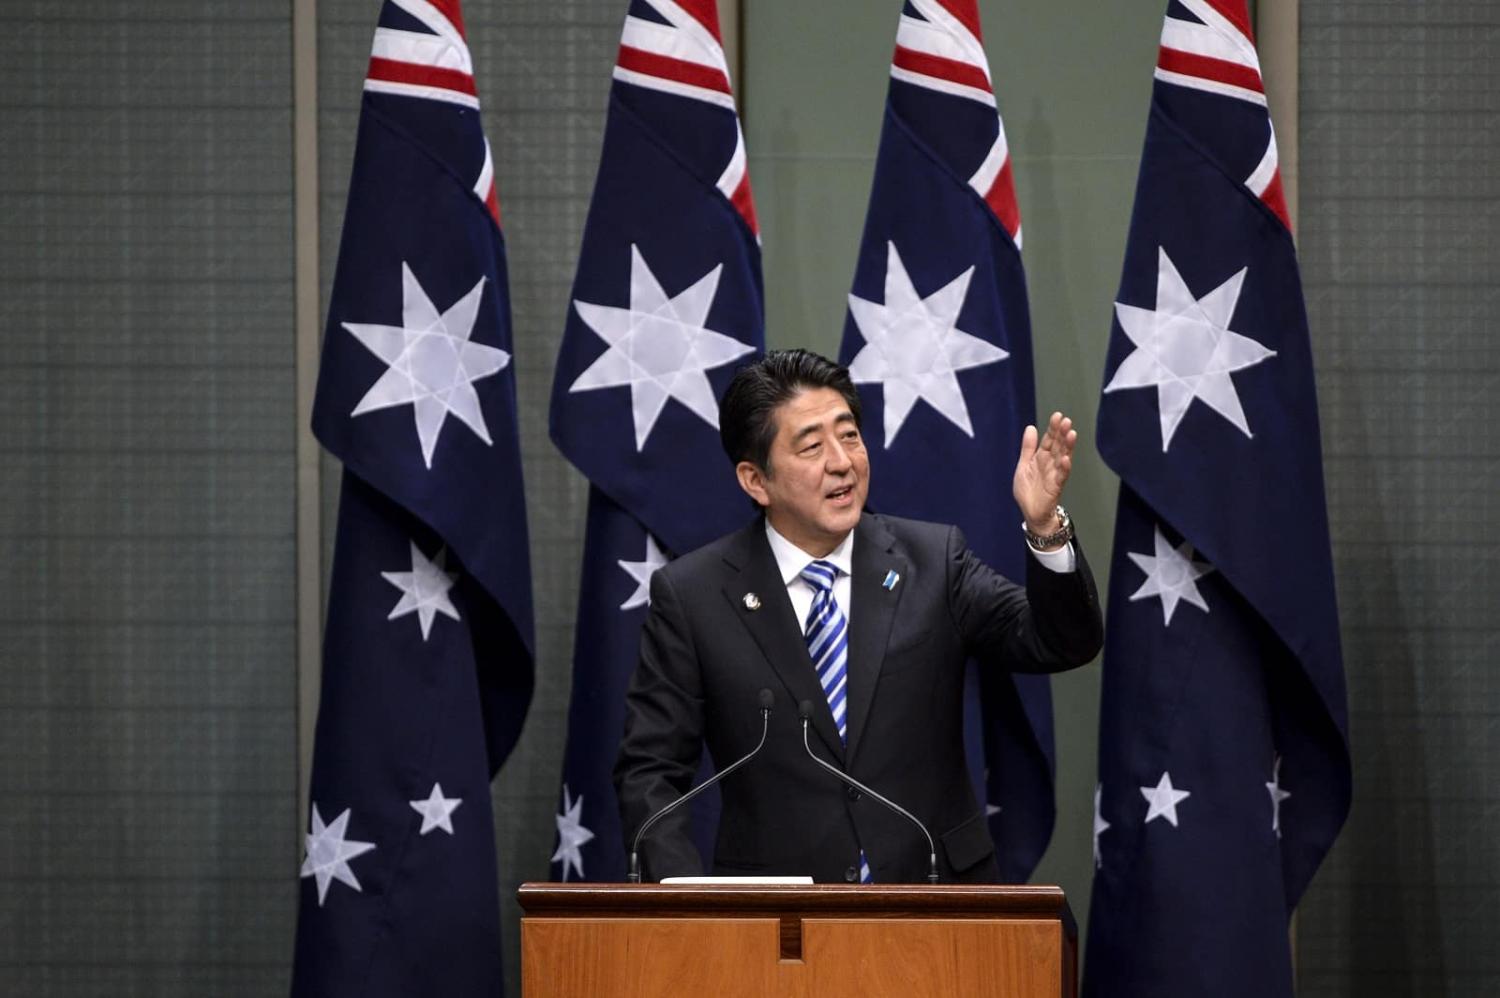 Shinzo Abe was a crucial player in the extraordinarily close bilateral relationship between Australia and Japan (Lukas Coch/Pool/Getty Images)